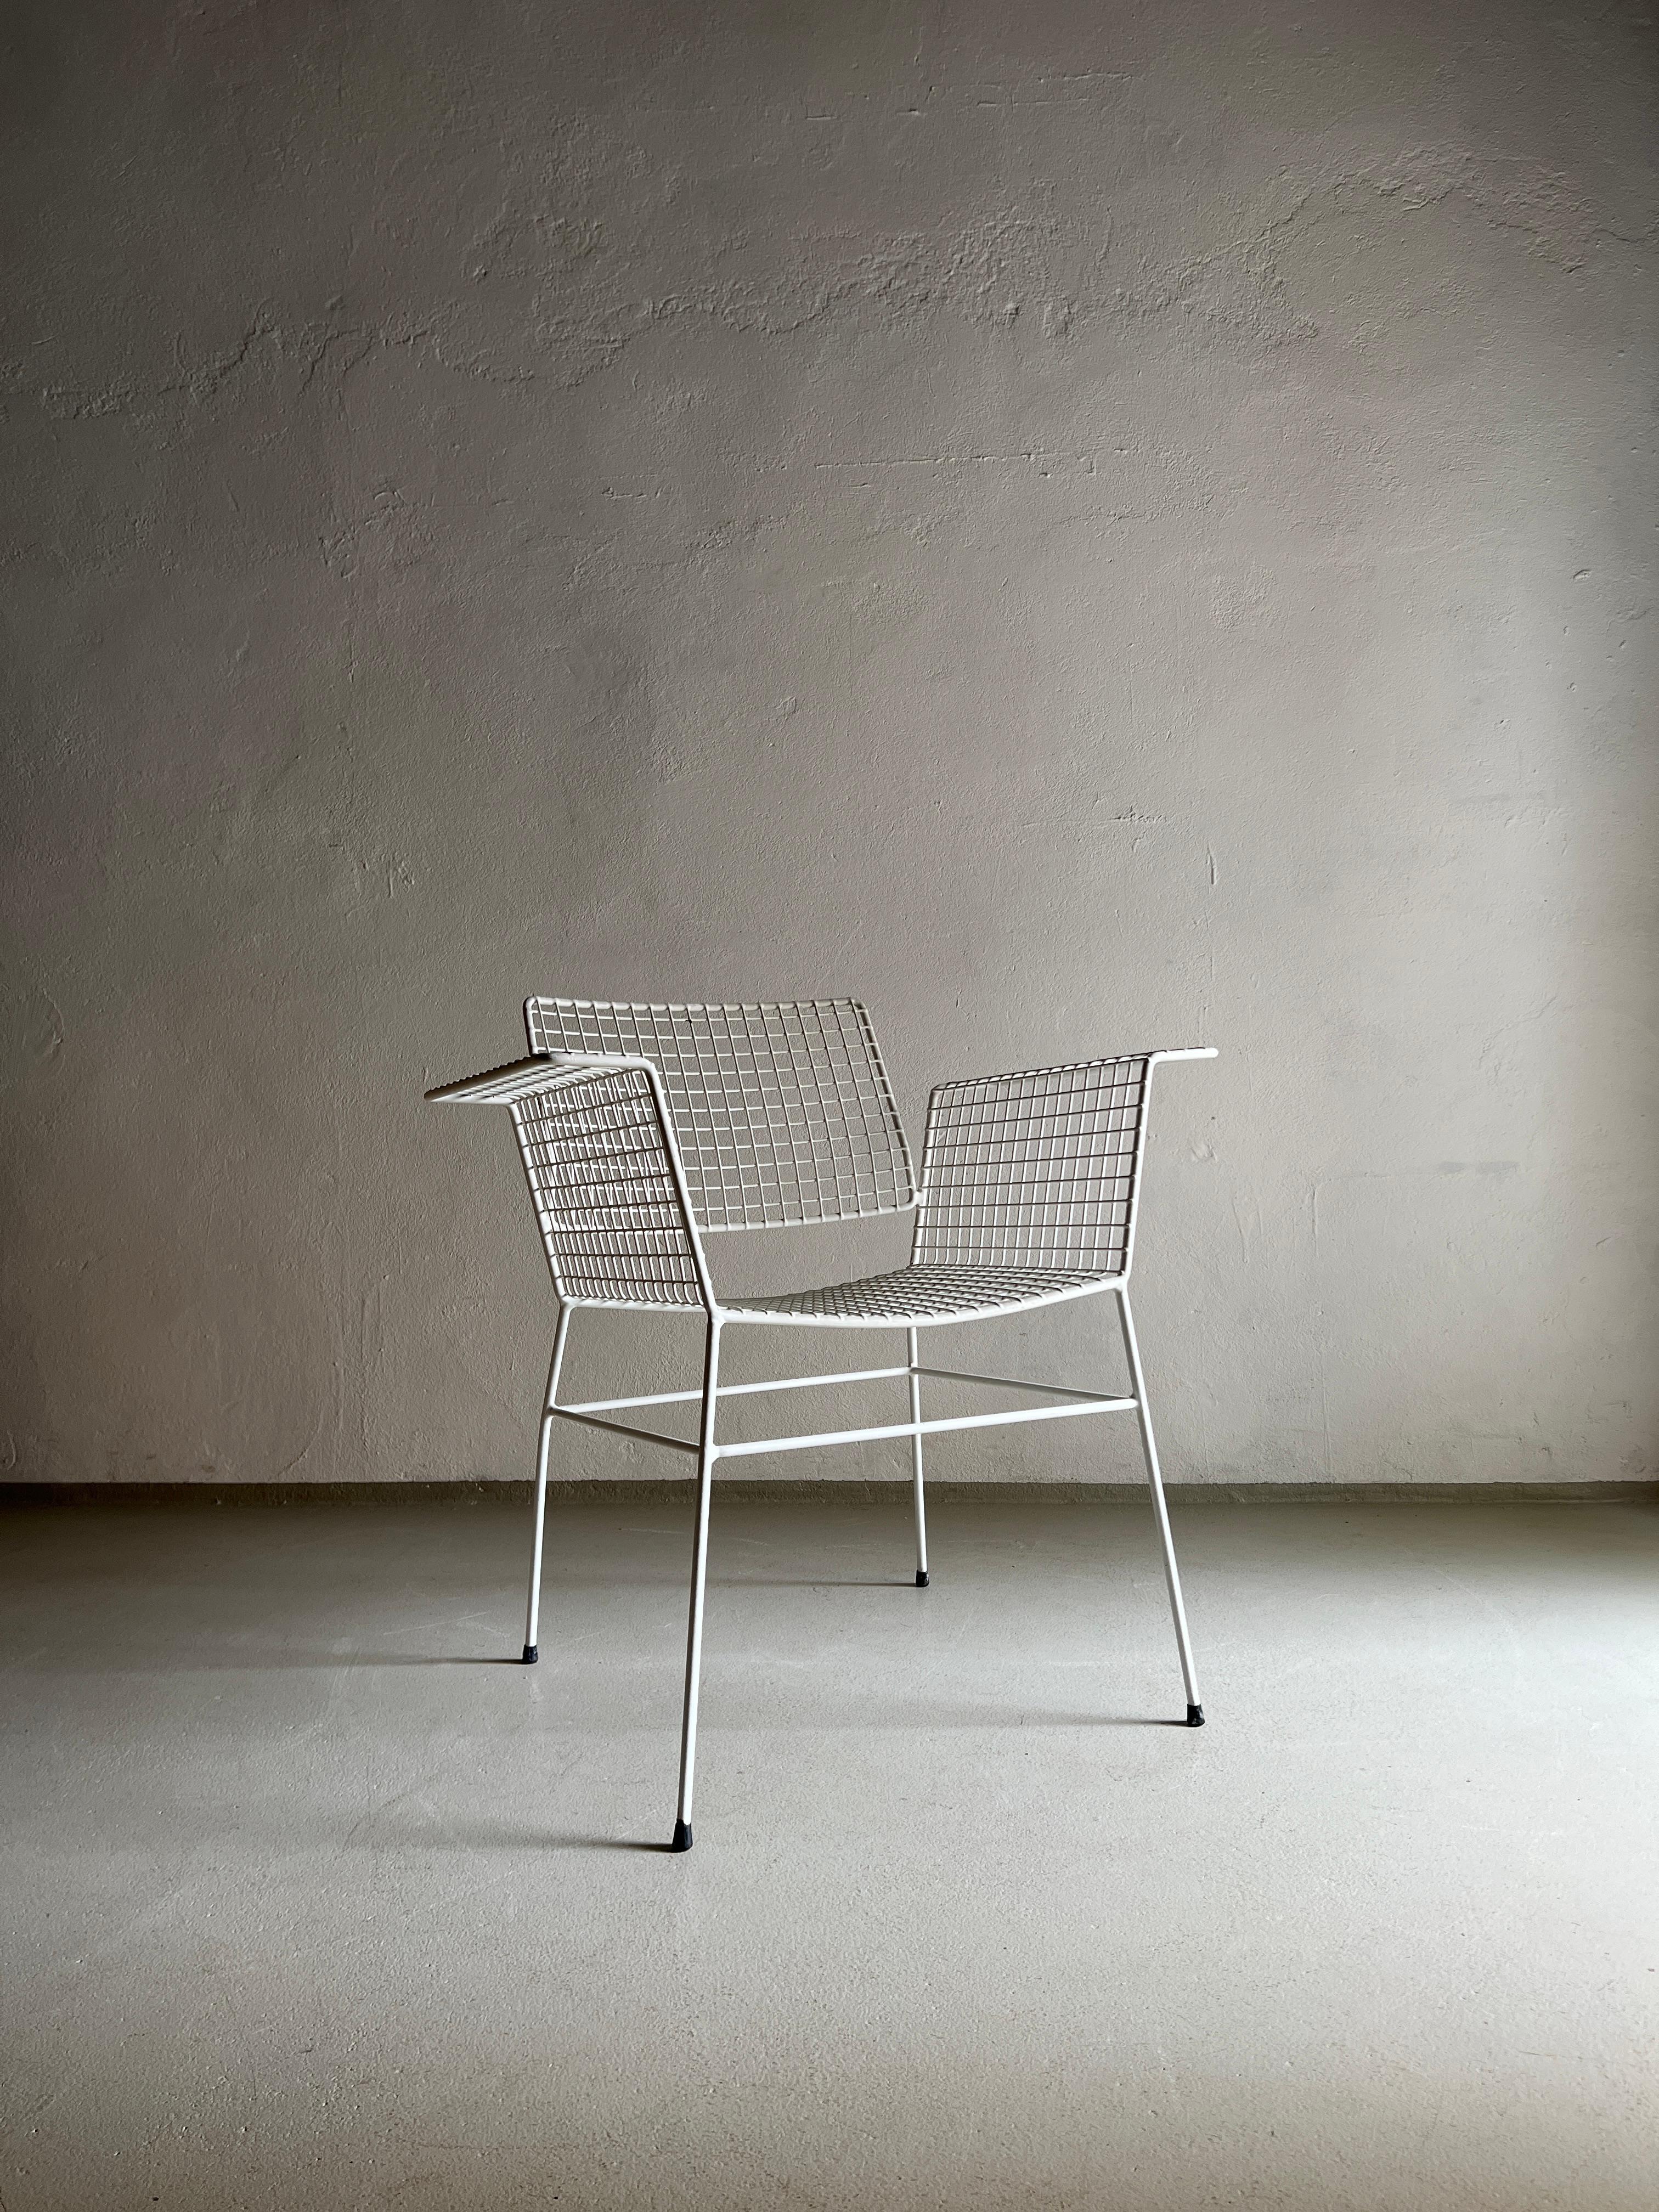 20th Century White Metal Wire Chair from Erlau Germany, 1960s For Sale